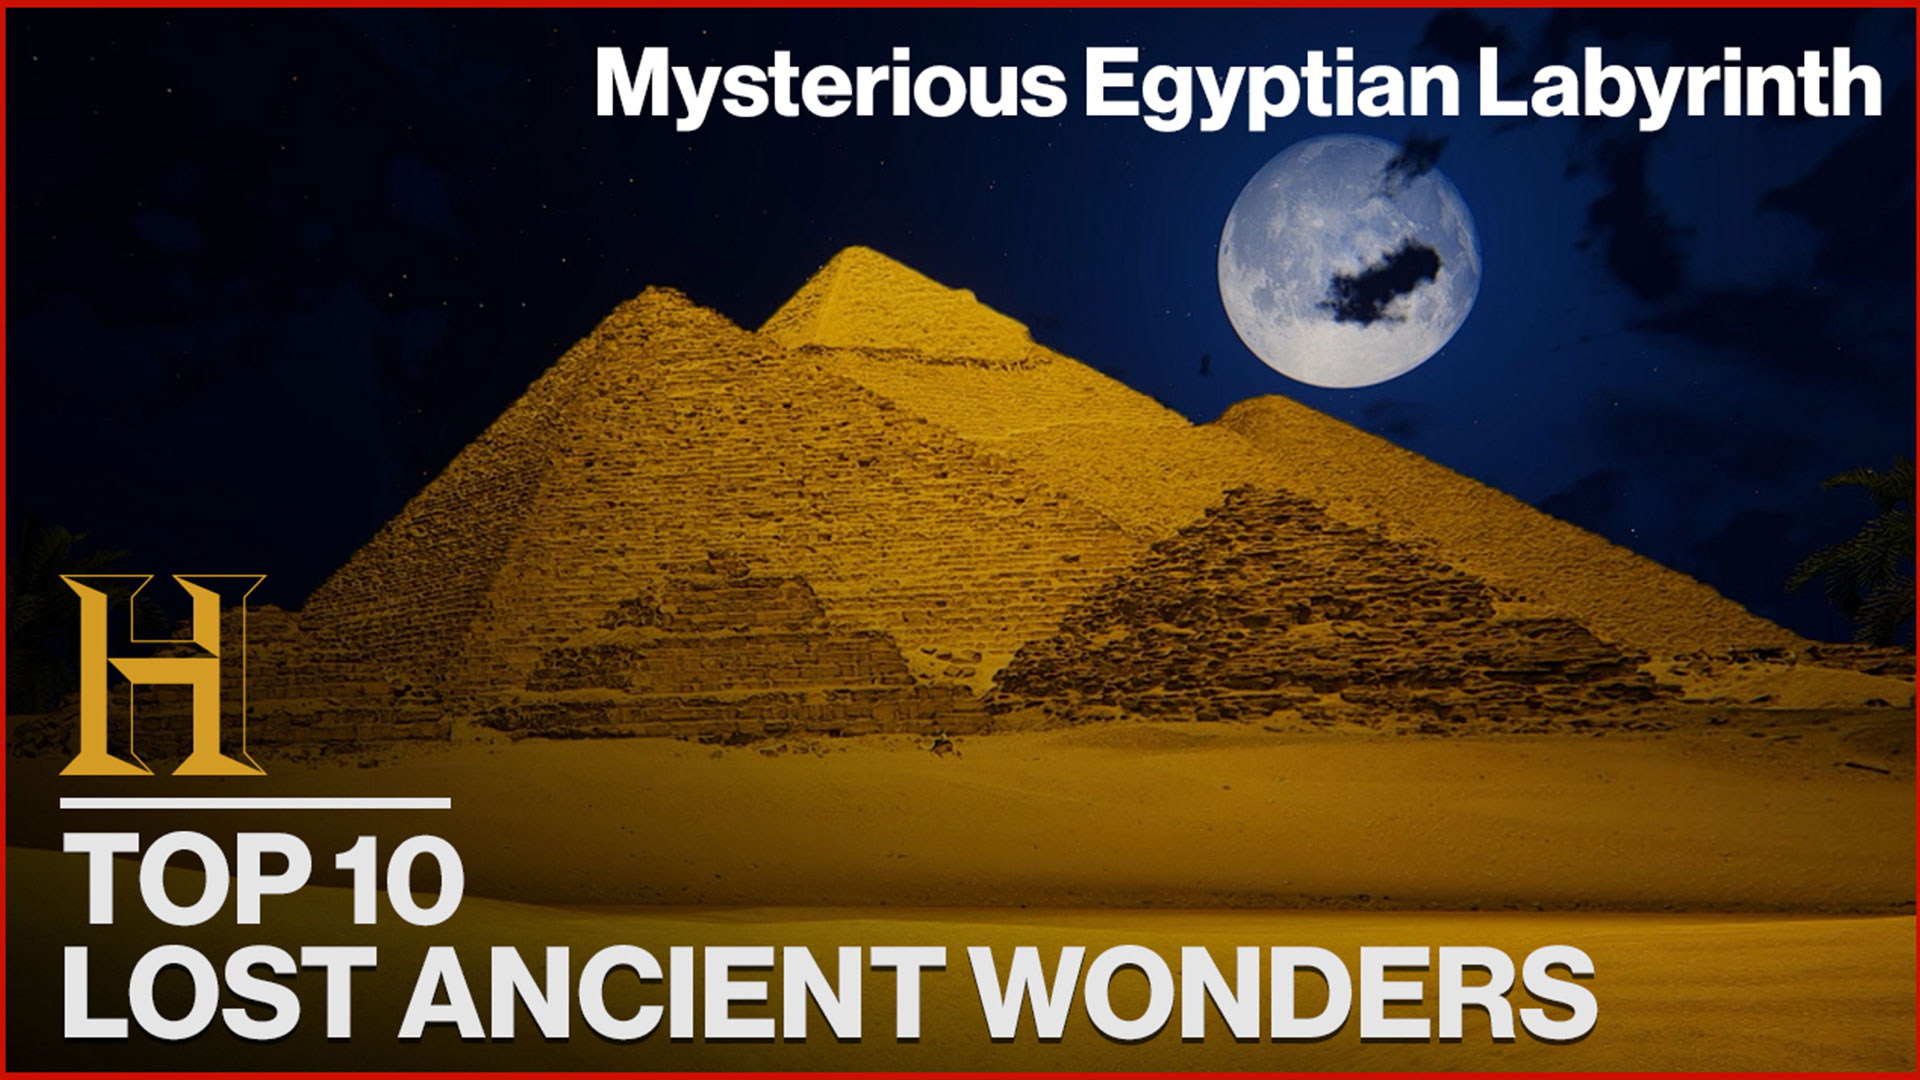 ancient wonders of the world list